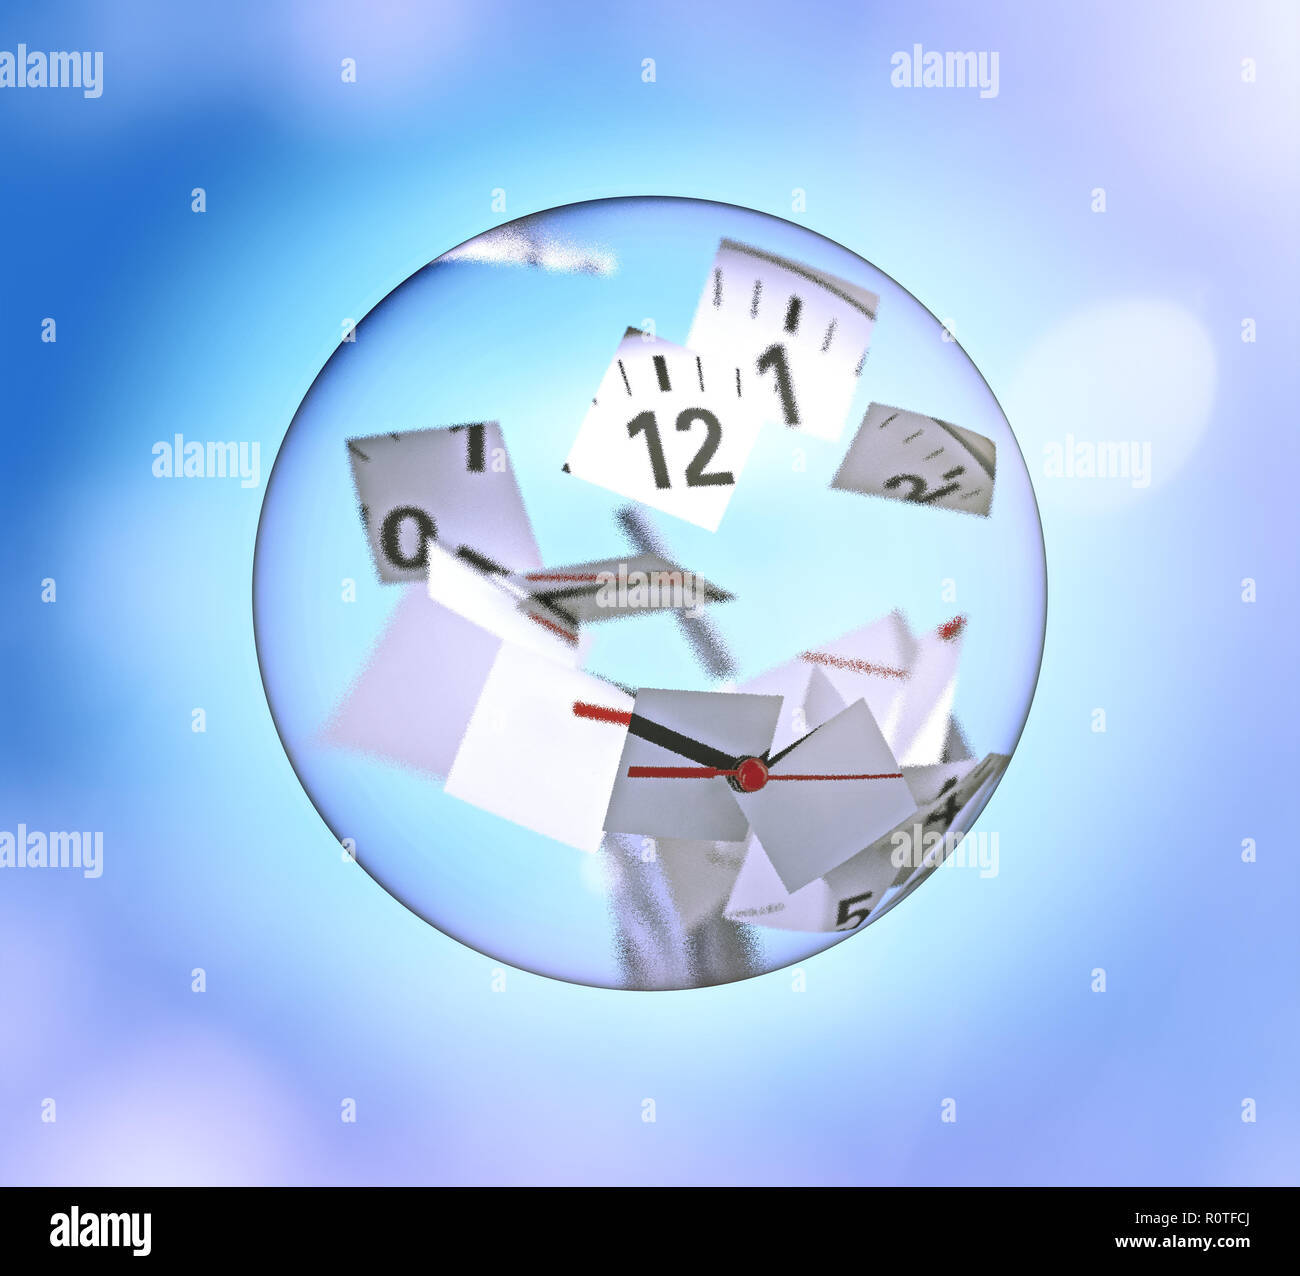 Clock broken into pieces inside a glass ball over a light blue bokeh background. 3D rendering illustration Stock Photo